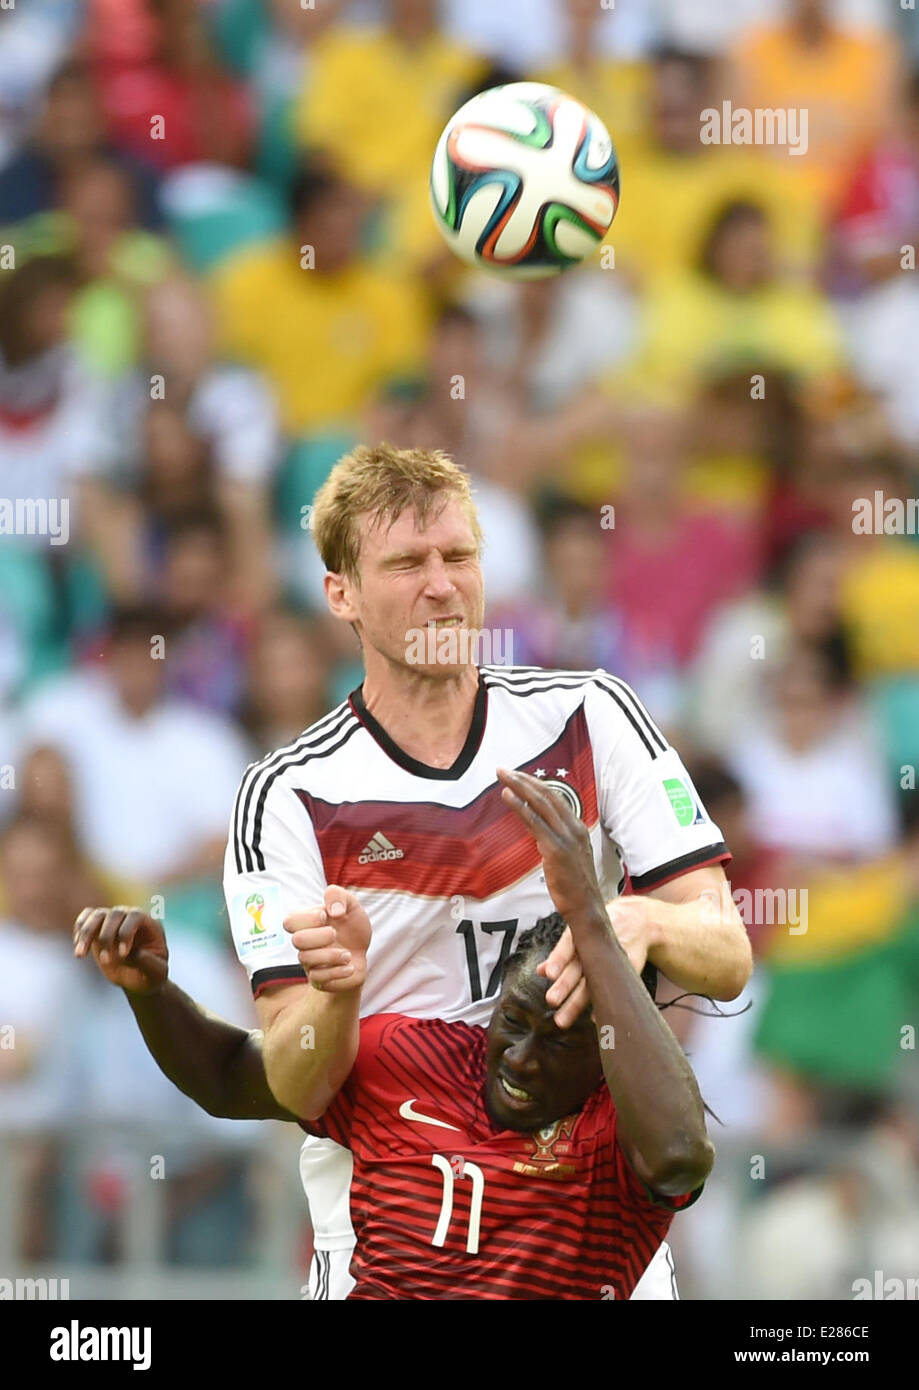 Salvador da Bahia, Brazil. 16th June, 2014. Per Mertesacker of Germany (top) vies for the ball with Eder of Portugal during the FIFA World Cup 2014 group G preliminary round match between Germany and Portugal at the Arena Fonte Nova Stadium in Salvador da Bahia, Brazil, 16 June 2014. Credit:  dpa picture alliance/Alamy Live News Stock Photo